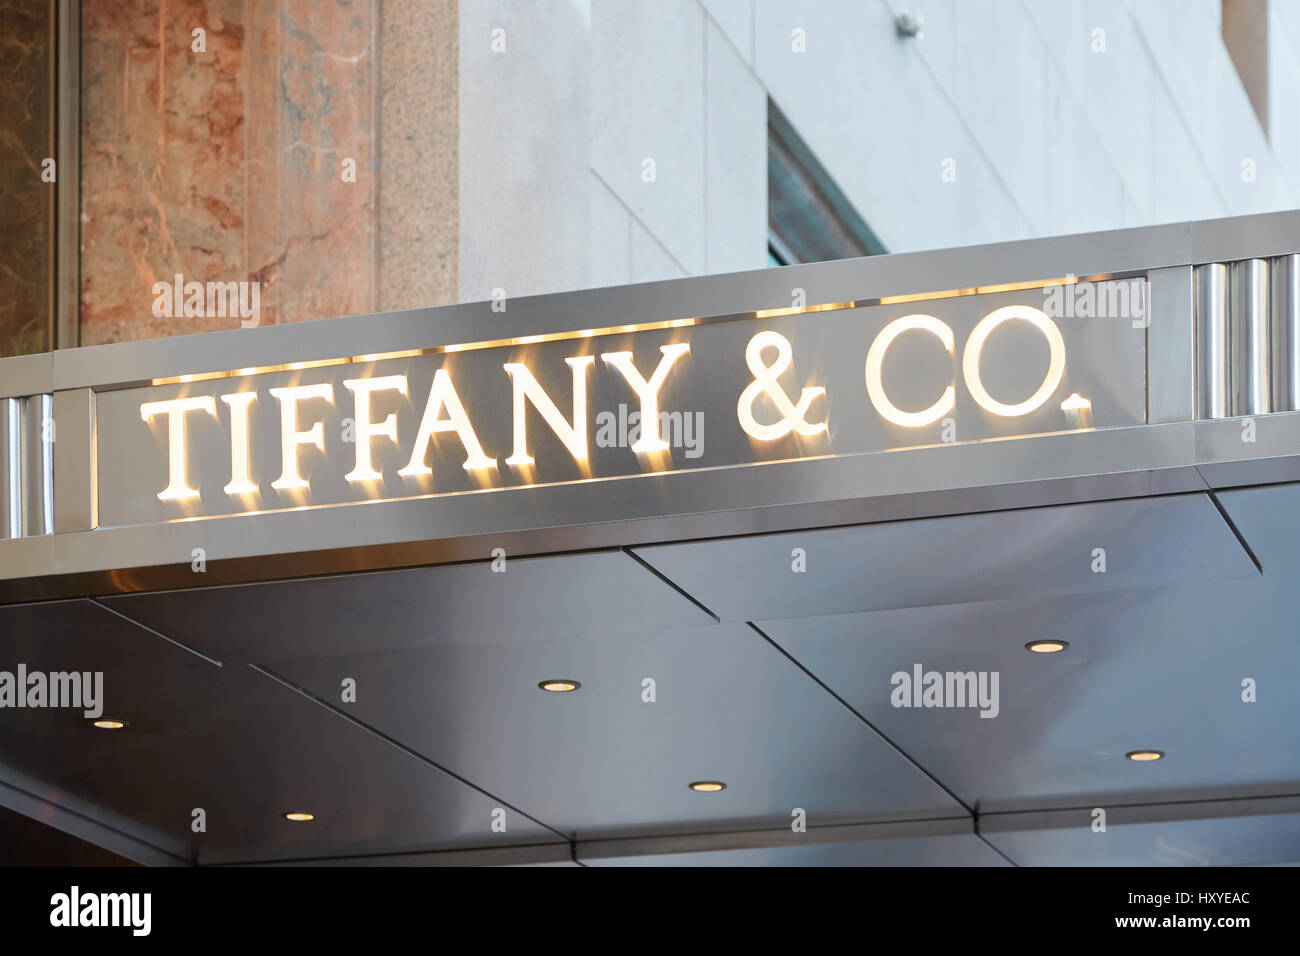 Tiffany e Co. shop sign Fifth Ave illuminated on September 12, 2016 in New York. Tiffany is an American internationally renowned jewelry retailer Stock Photo